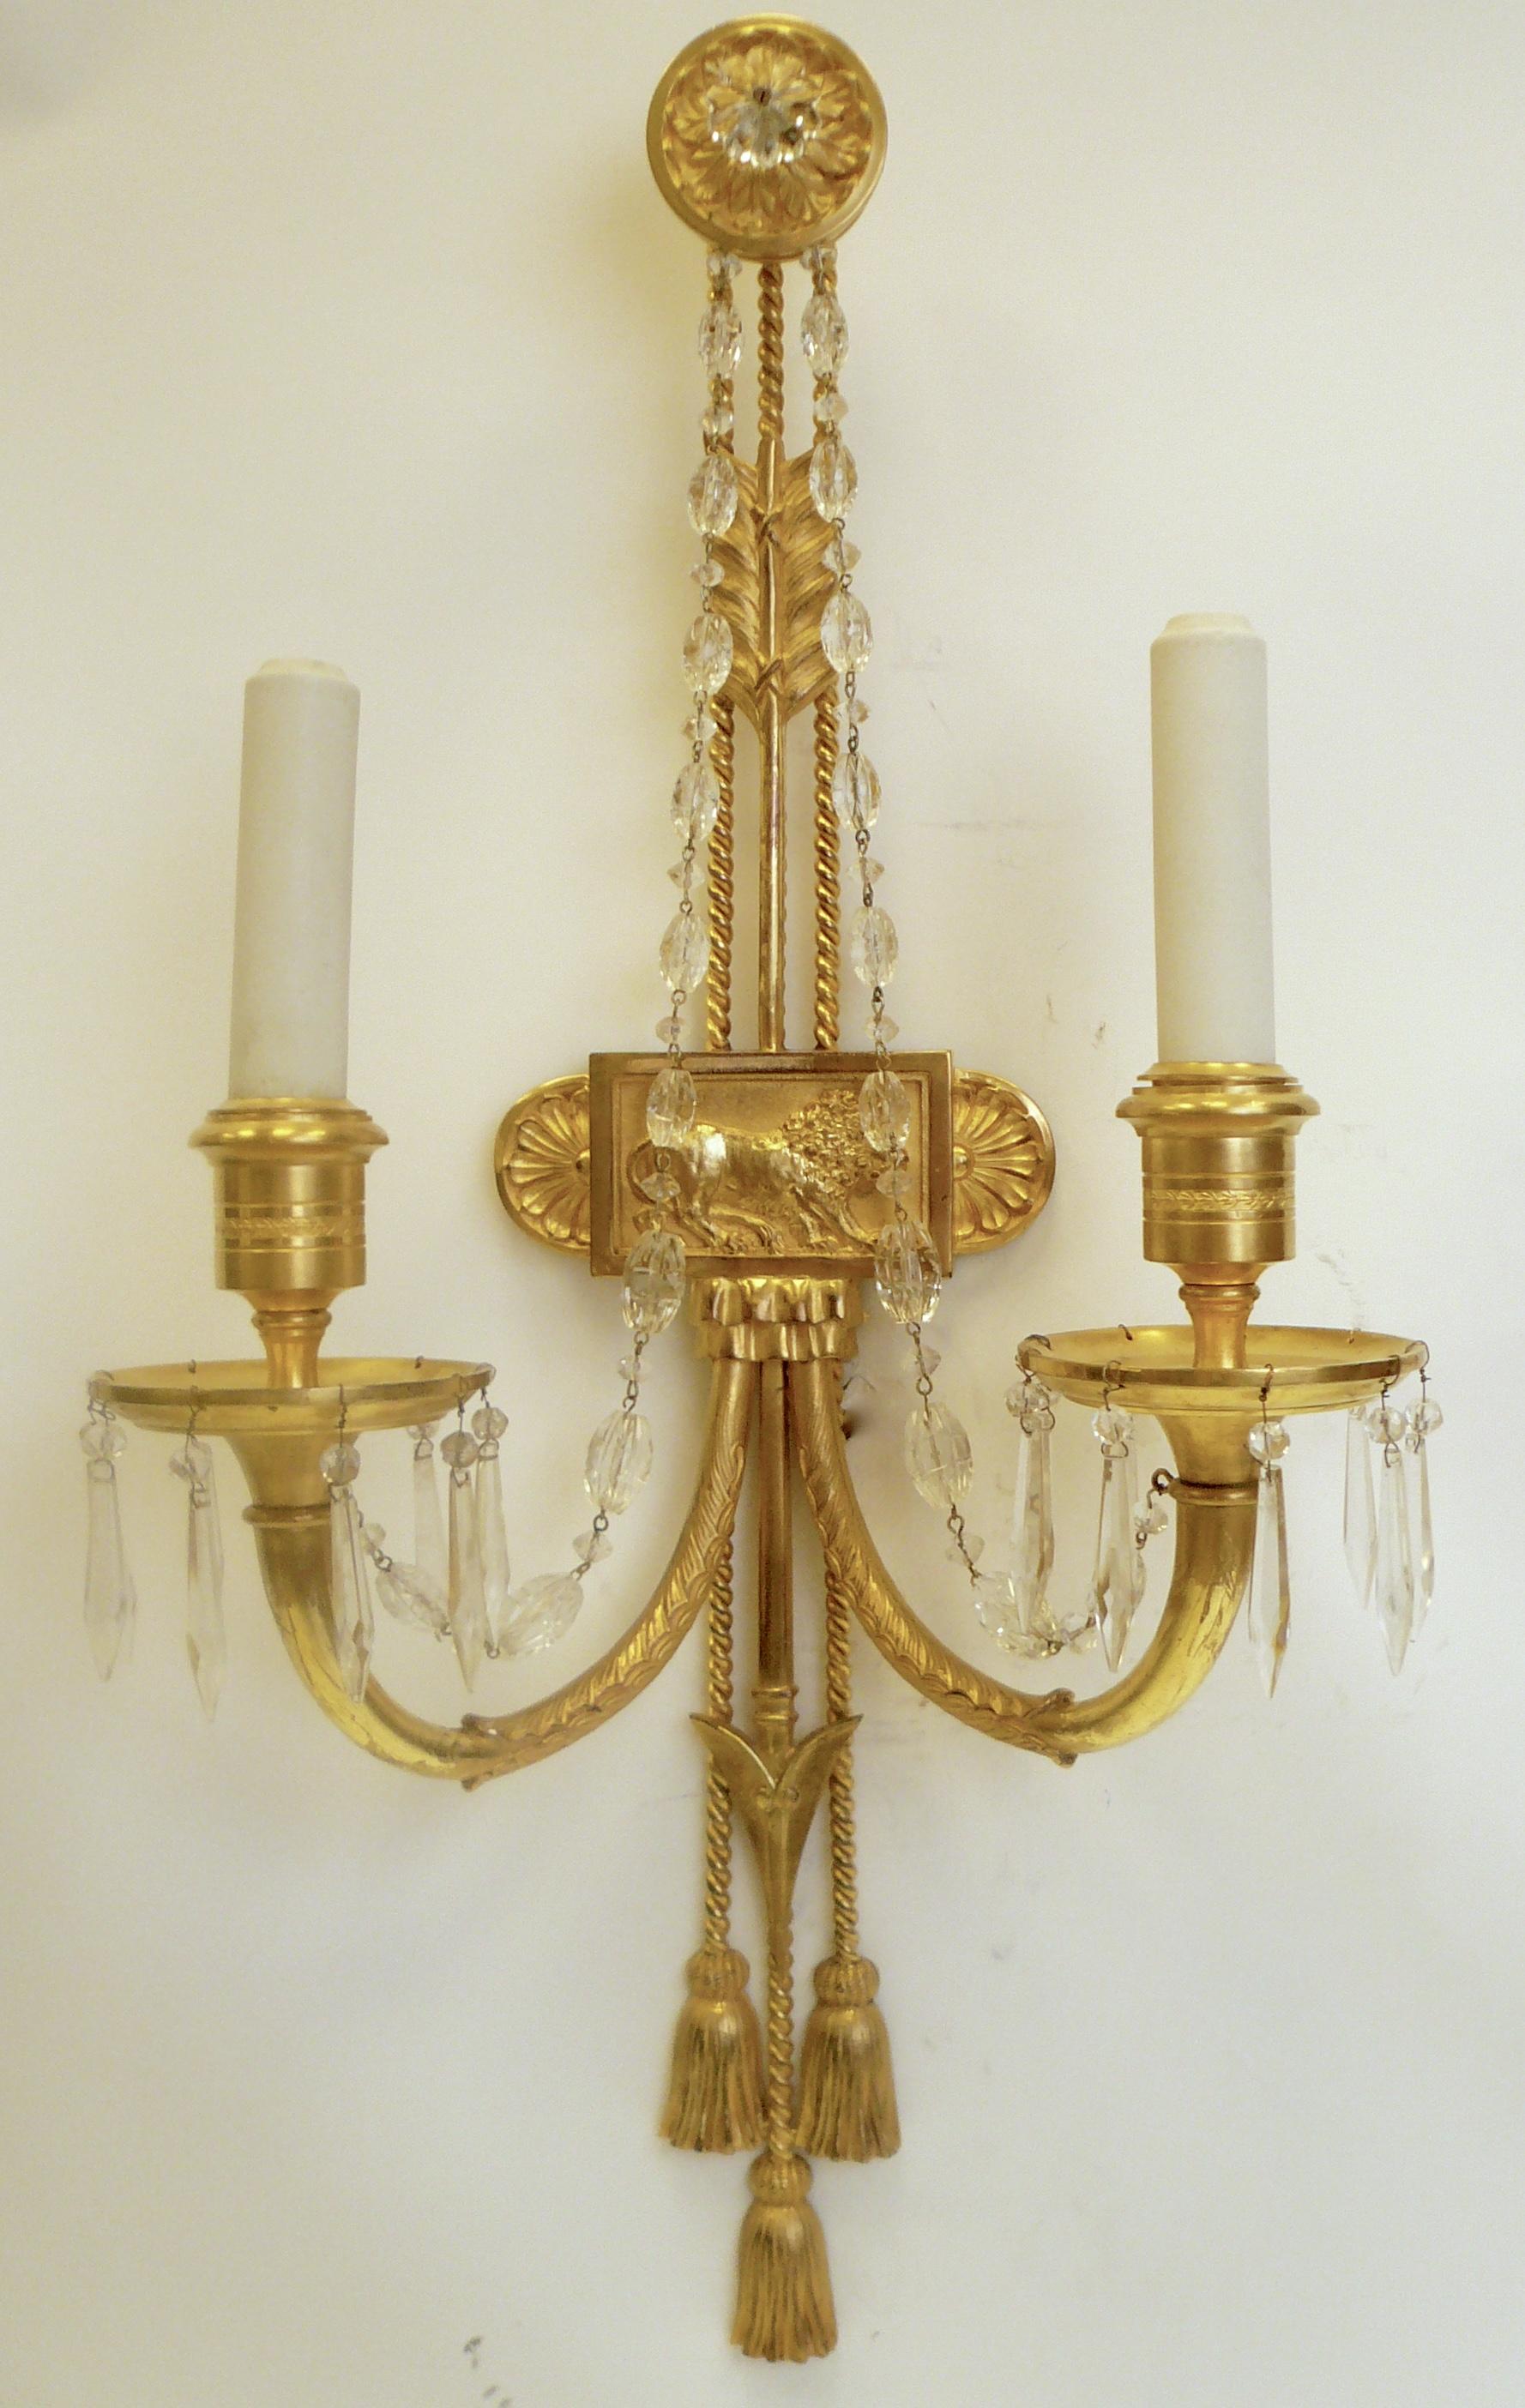 This impressive pair of Empire style 'lion' sconces are by Edward F. Caldwell.
They feature Classical motifs including acanthus leaves, arrows, rosettes, and roped tassels. They retain the original gilt bronze finish, and have been newly re-wired.